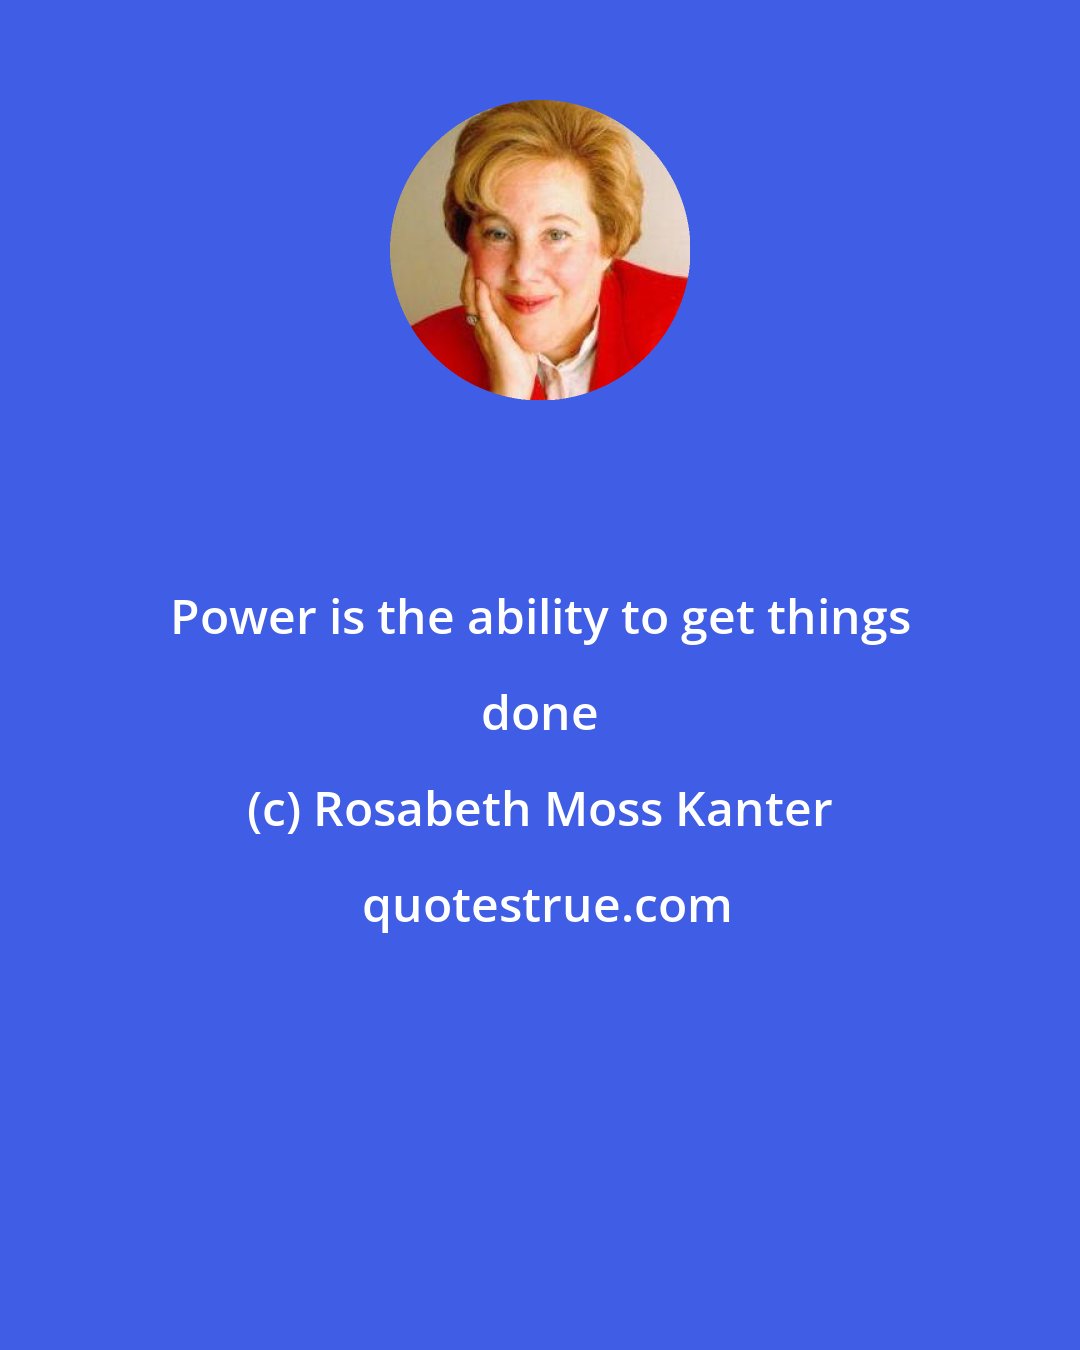 Rosabeth Moss Kanter: Power is the ability to get things done